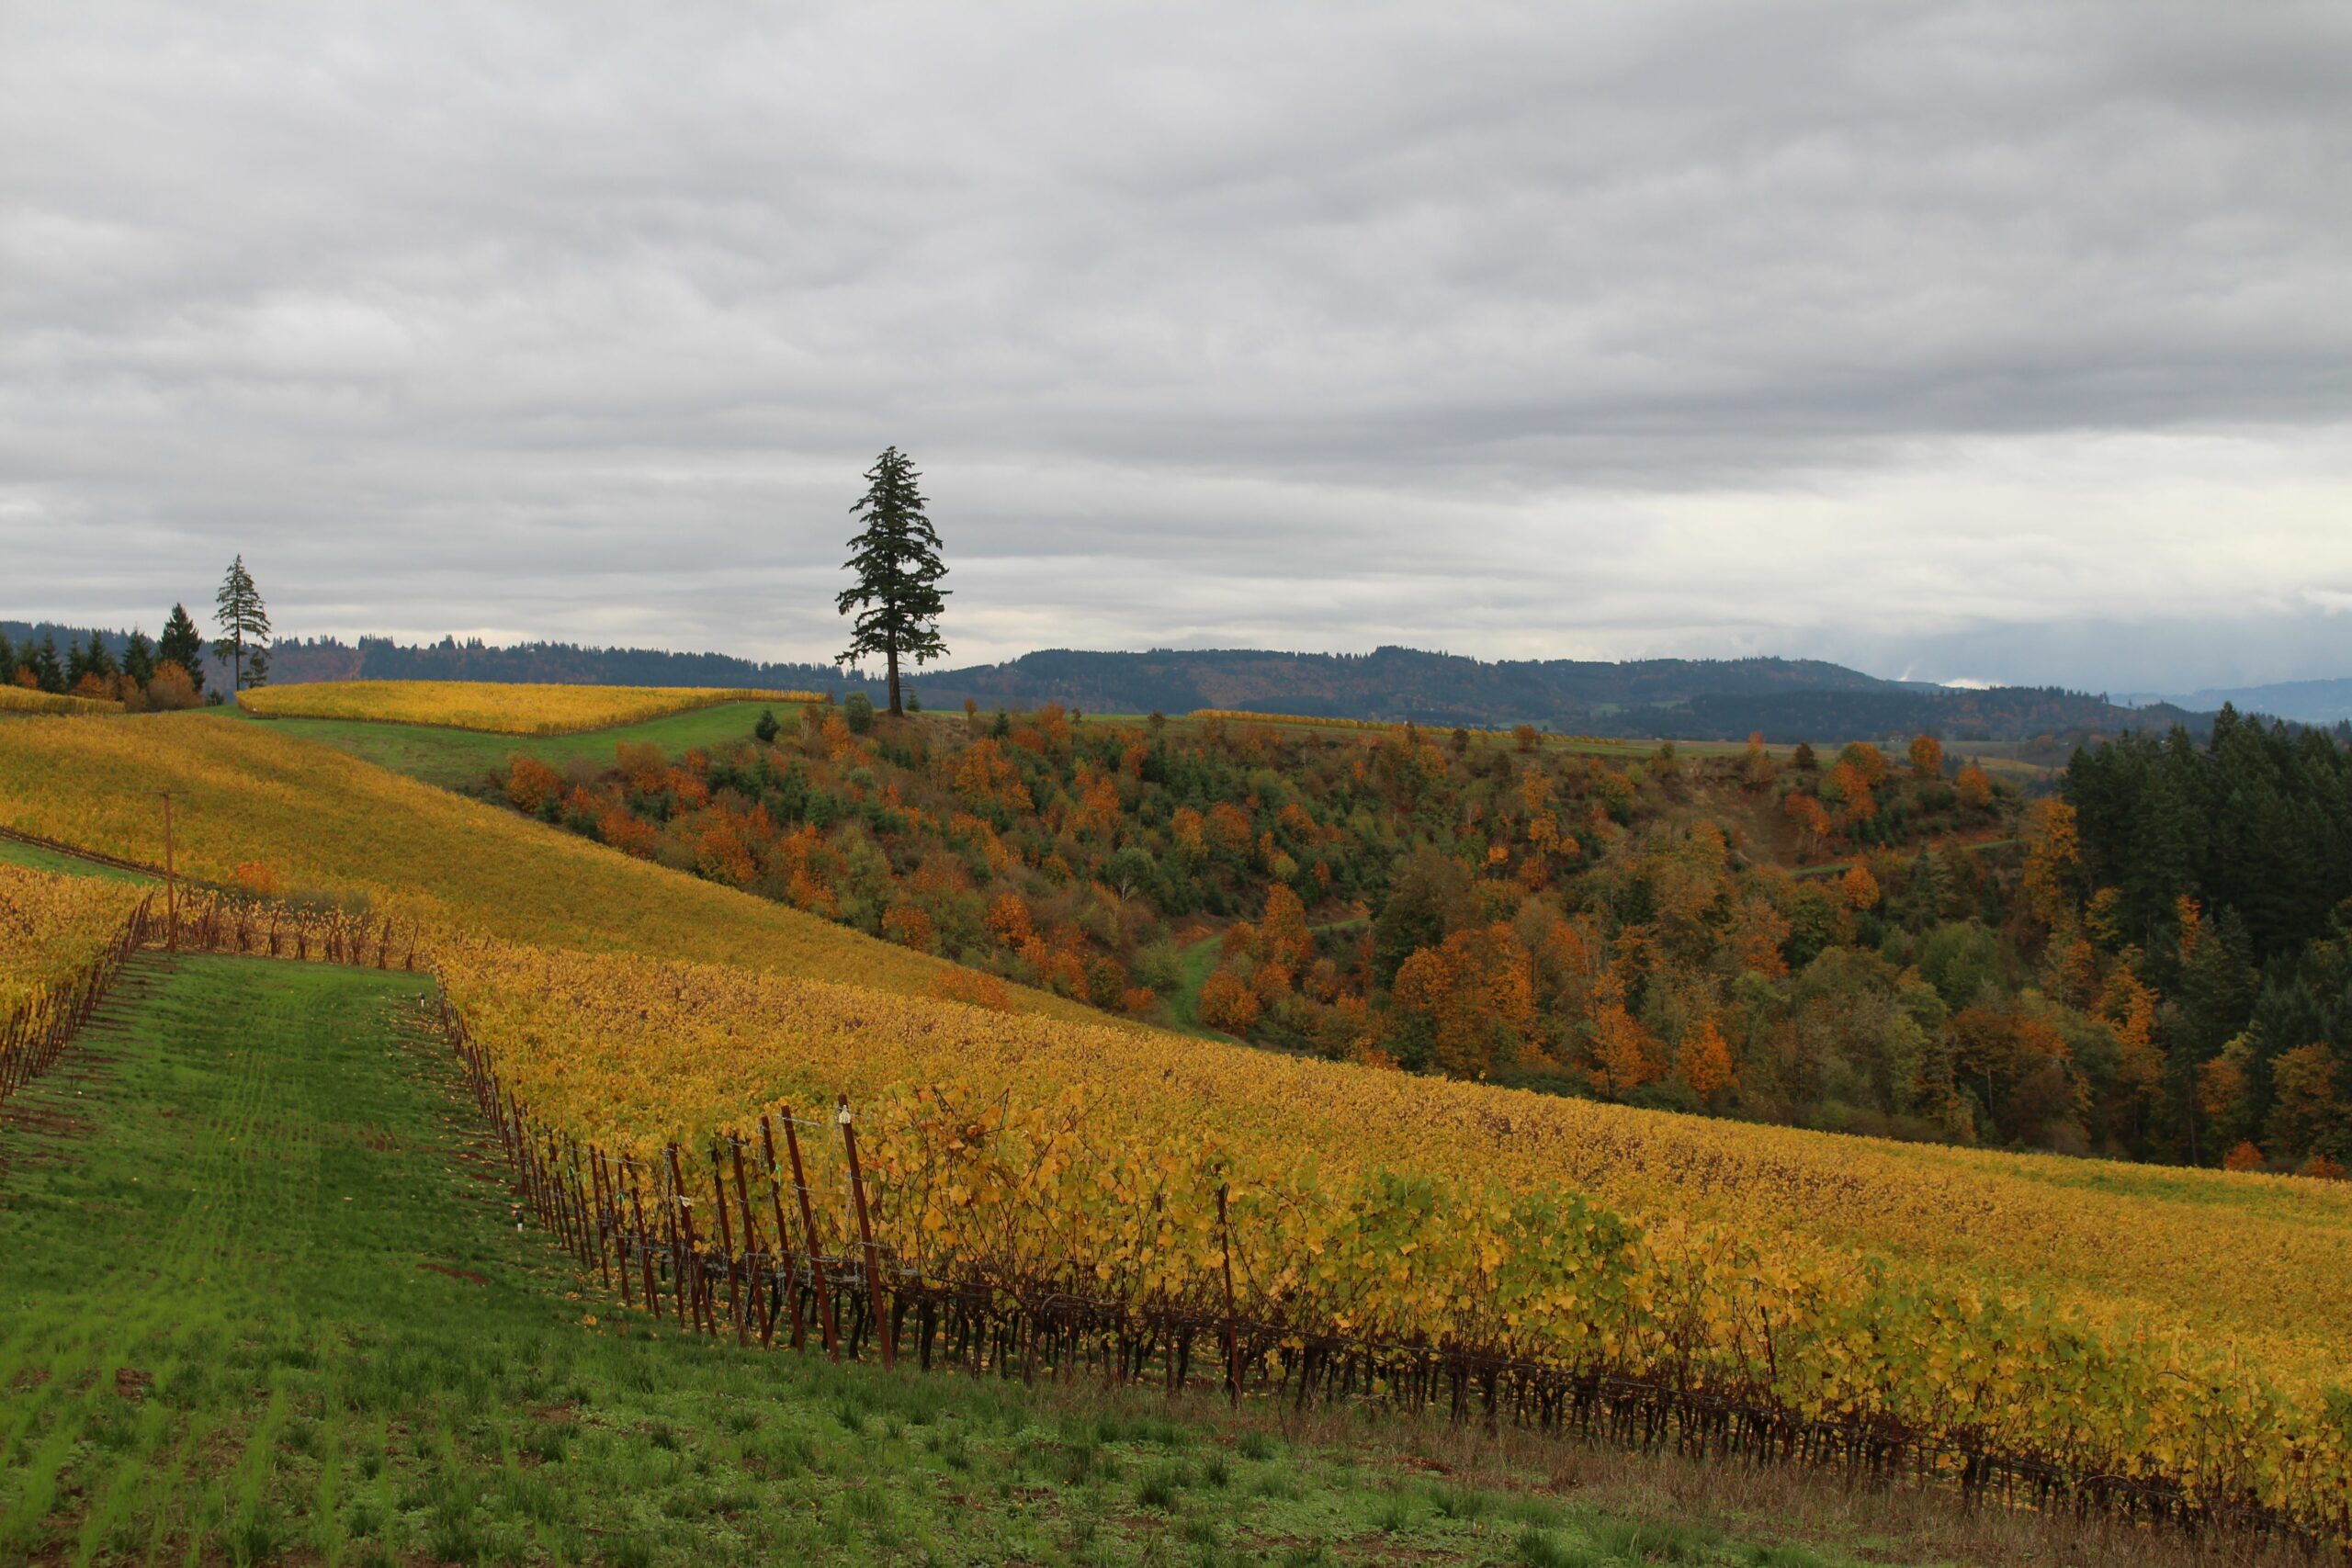 Golden vines and beautiful fall trees beneath a cloudy sky at Fairsing Vineyard in Oregon's Willamette Valley